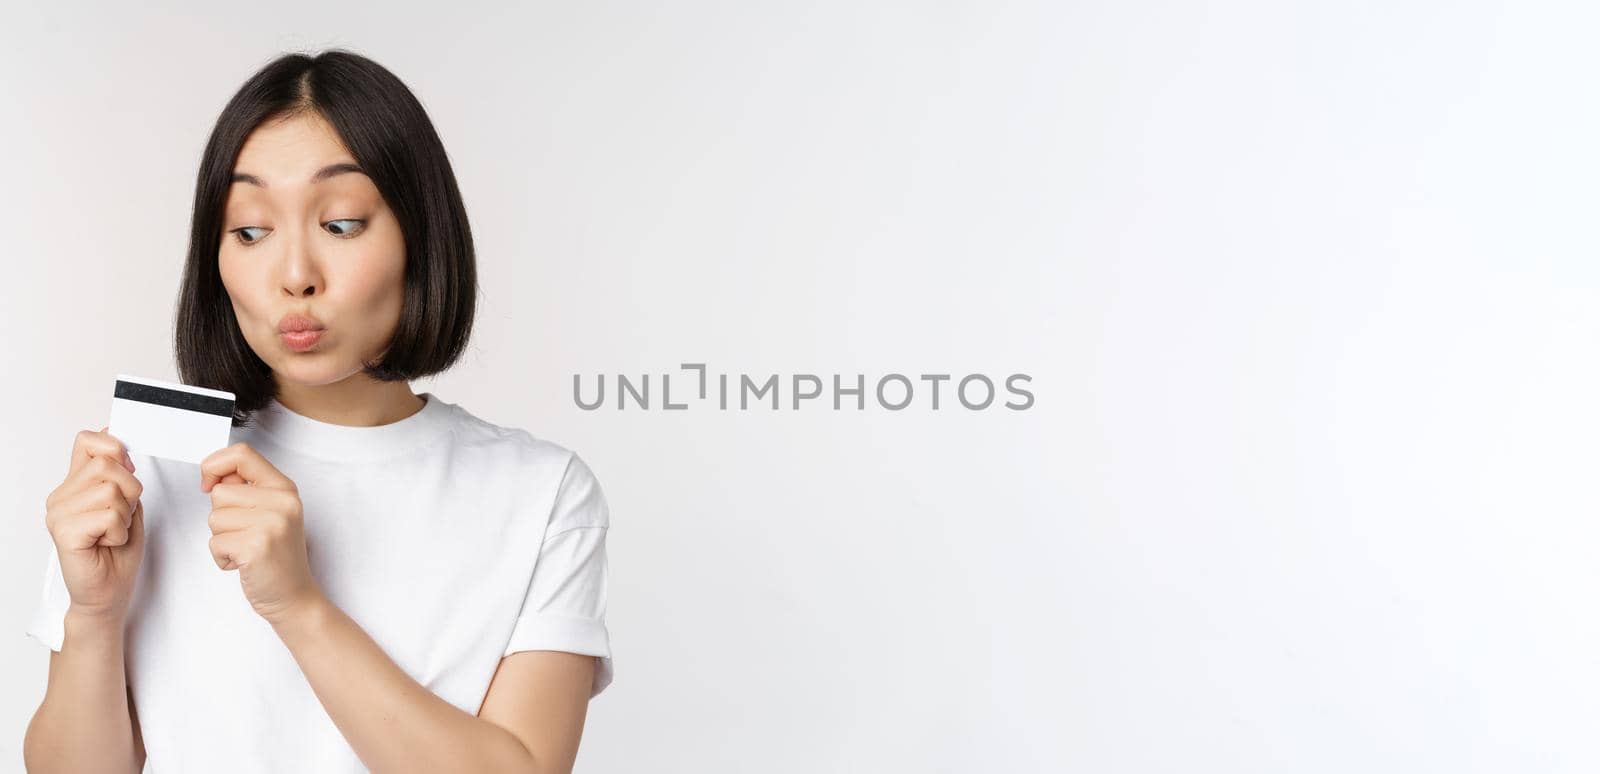 Money and finance concept. Cute japanese girl kissing her credit card, standing in tshirt over white background.